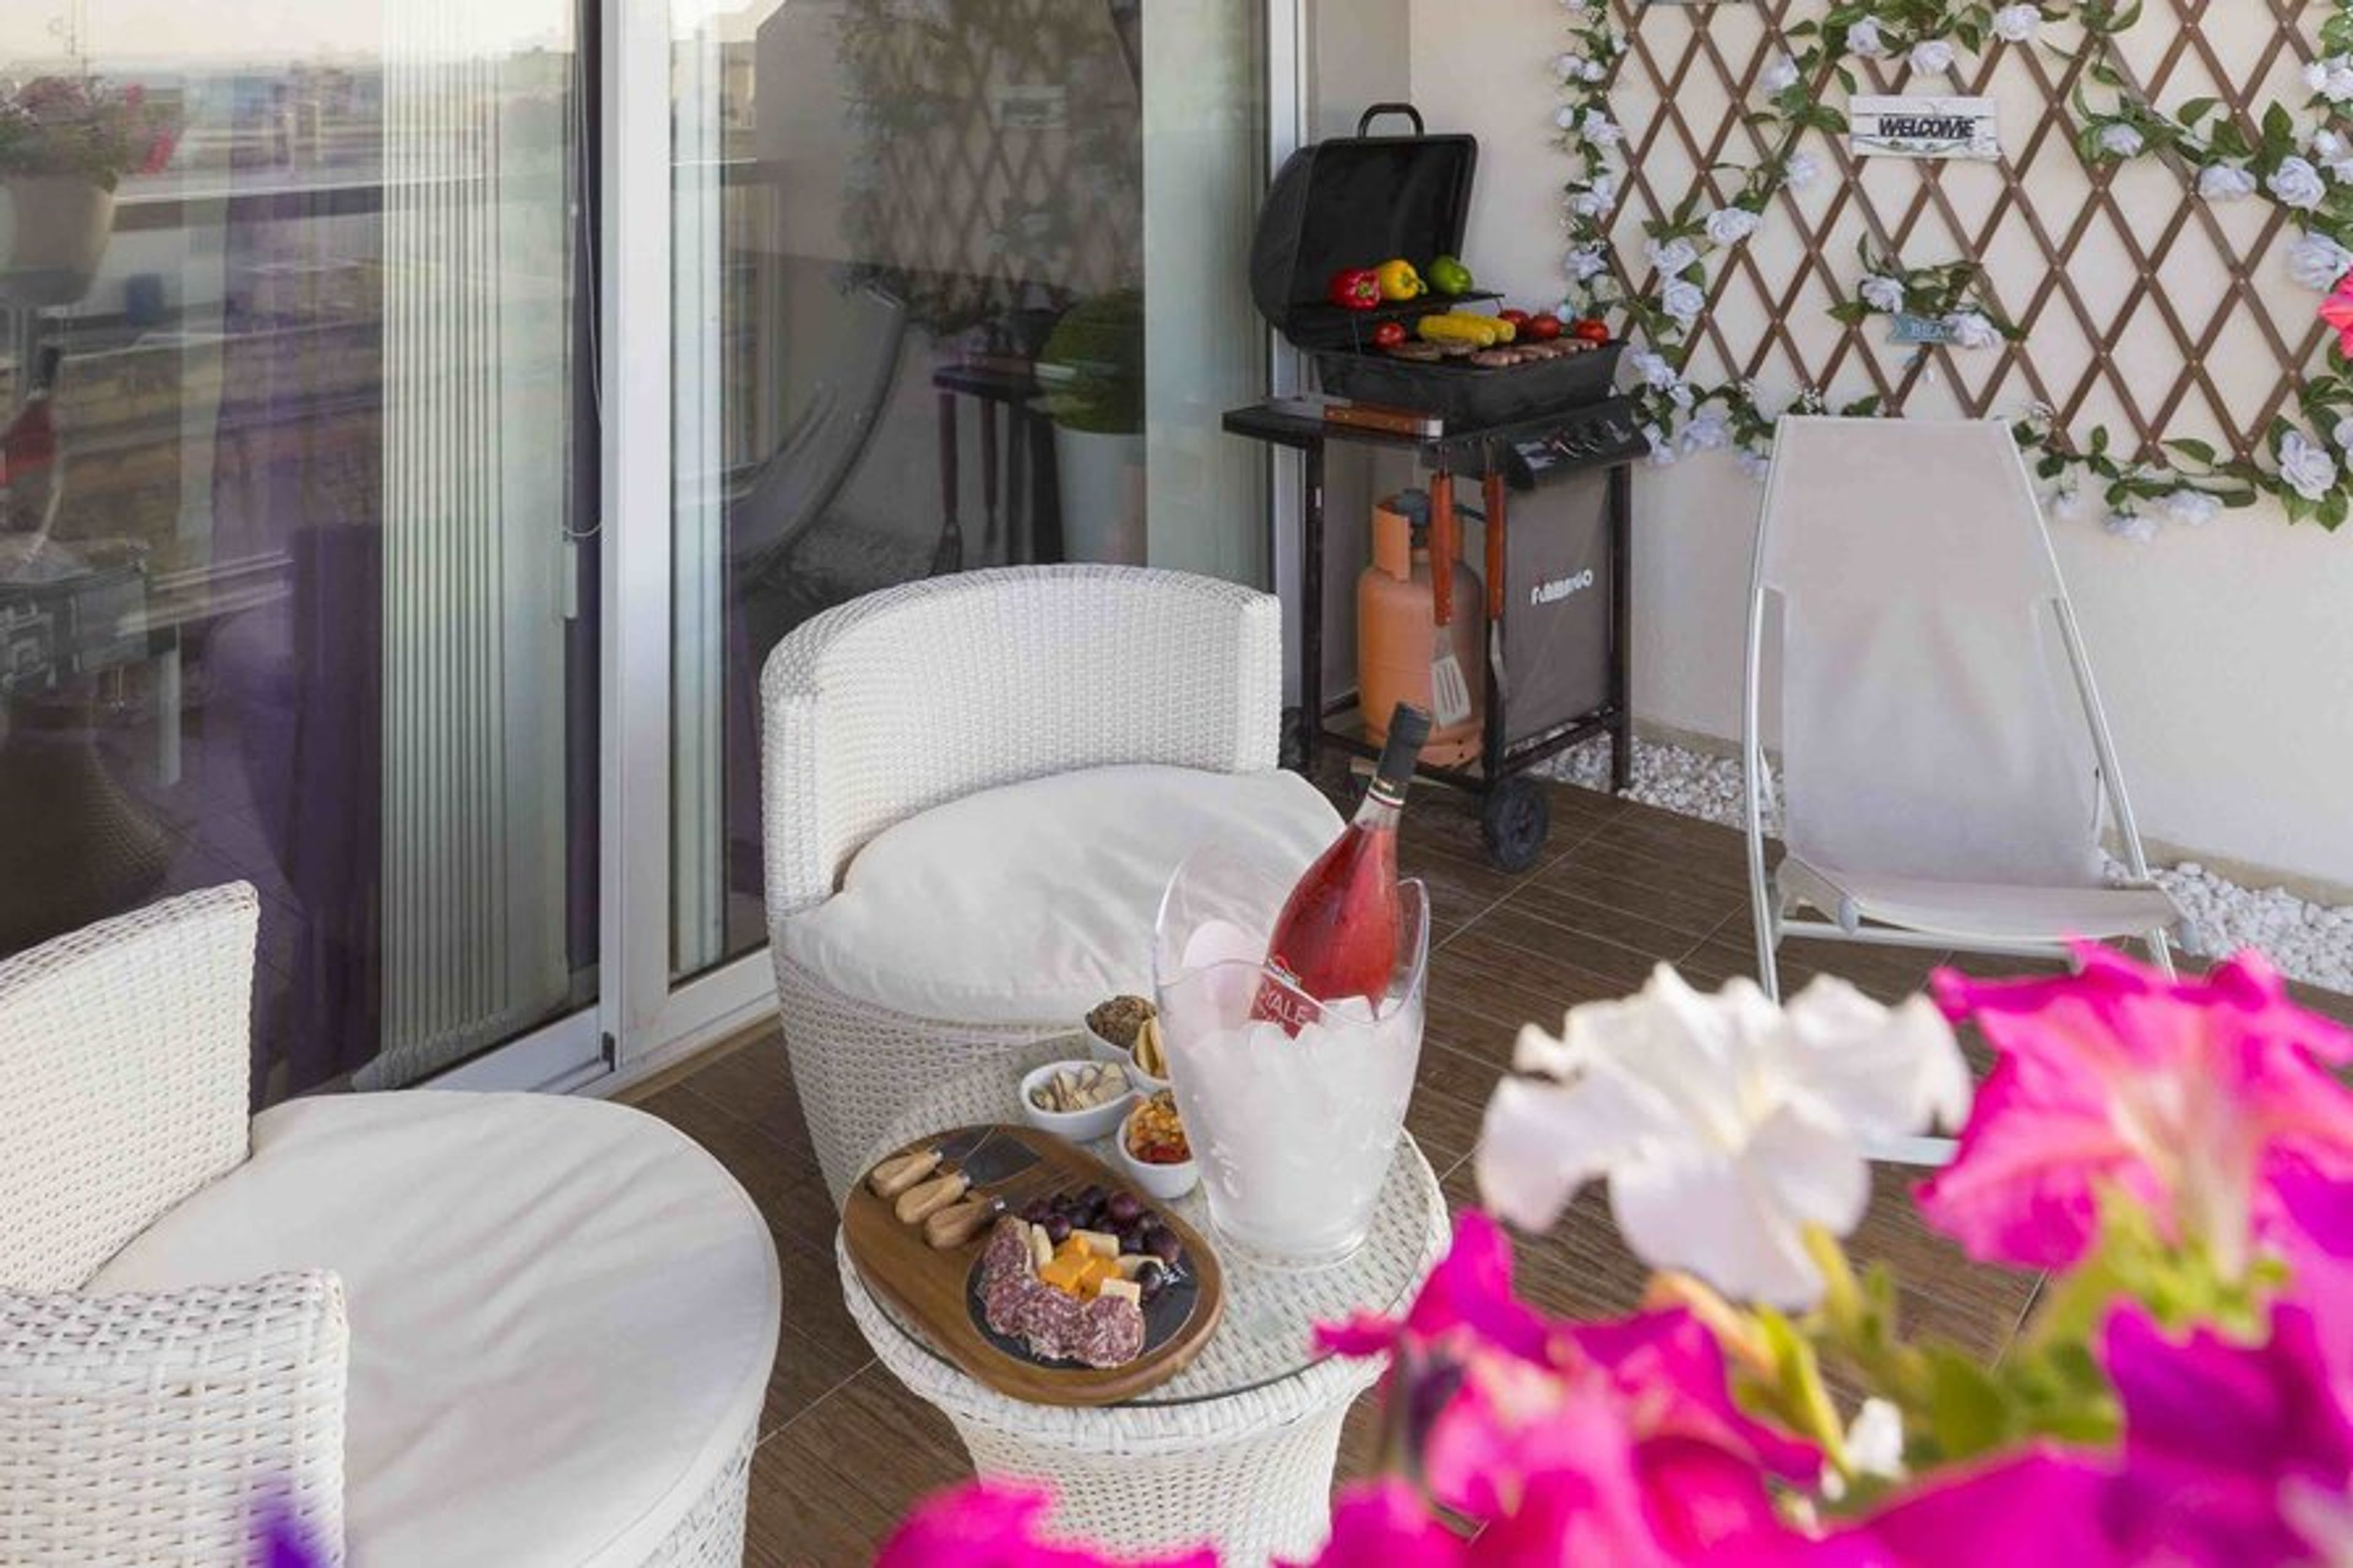 Balcony Area with outdoor furniture and BBQ